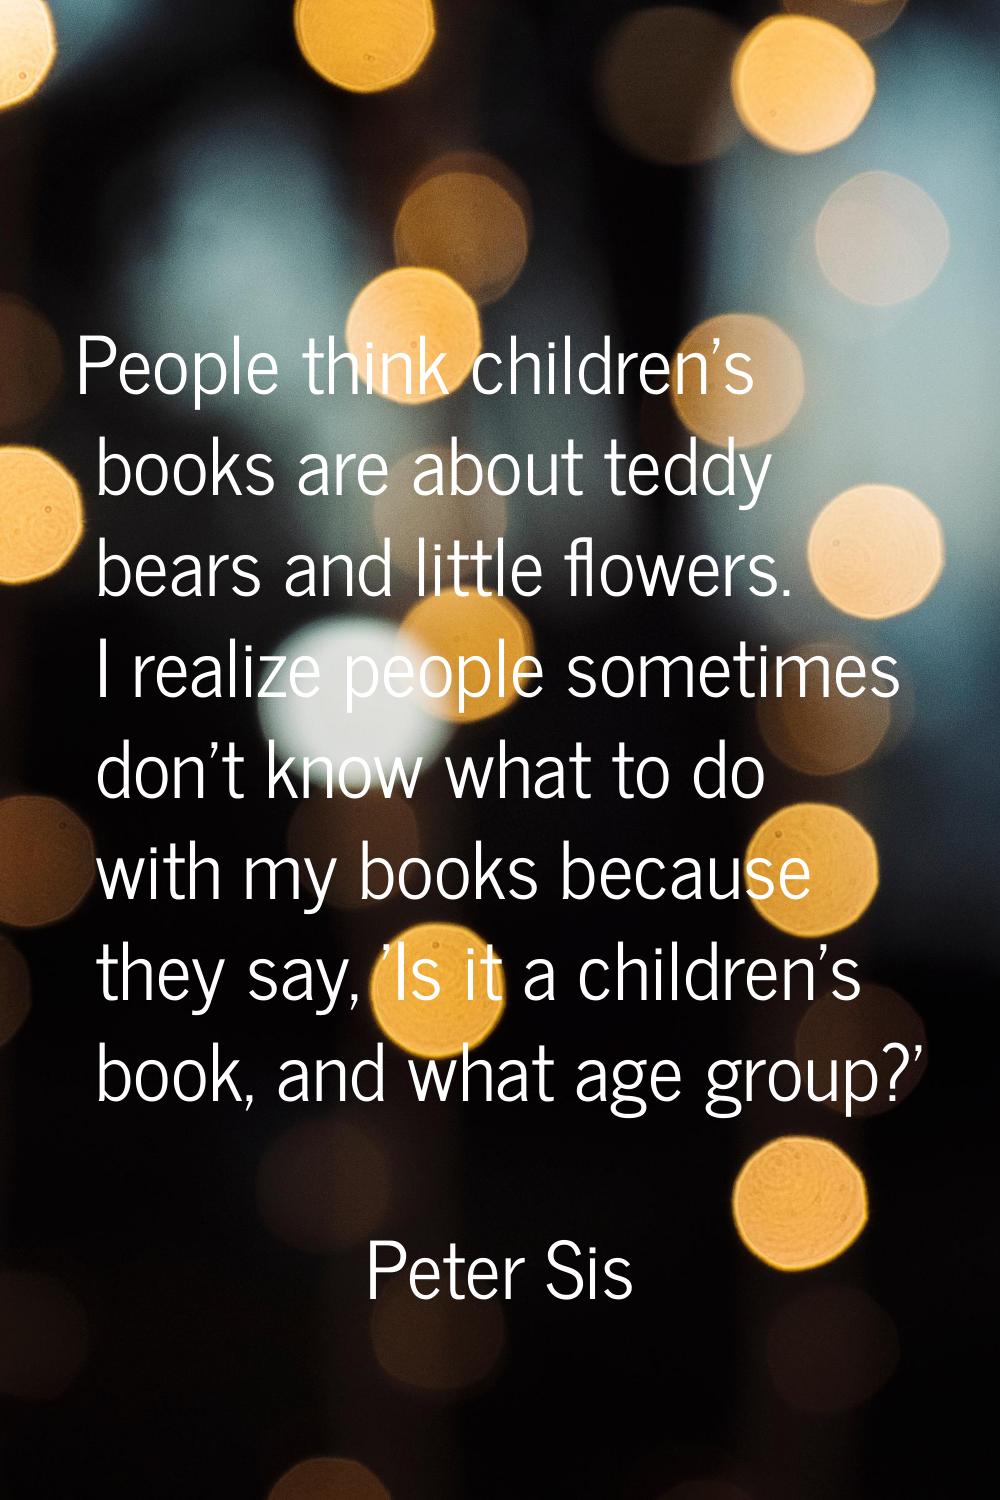 People think children's books are about teddy bears and little flowers. I realize people sometimes 